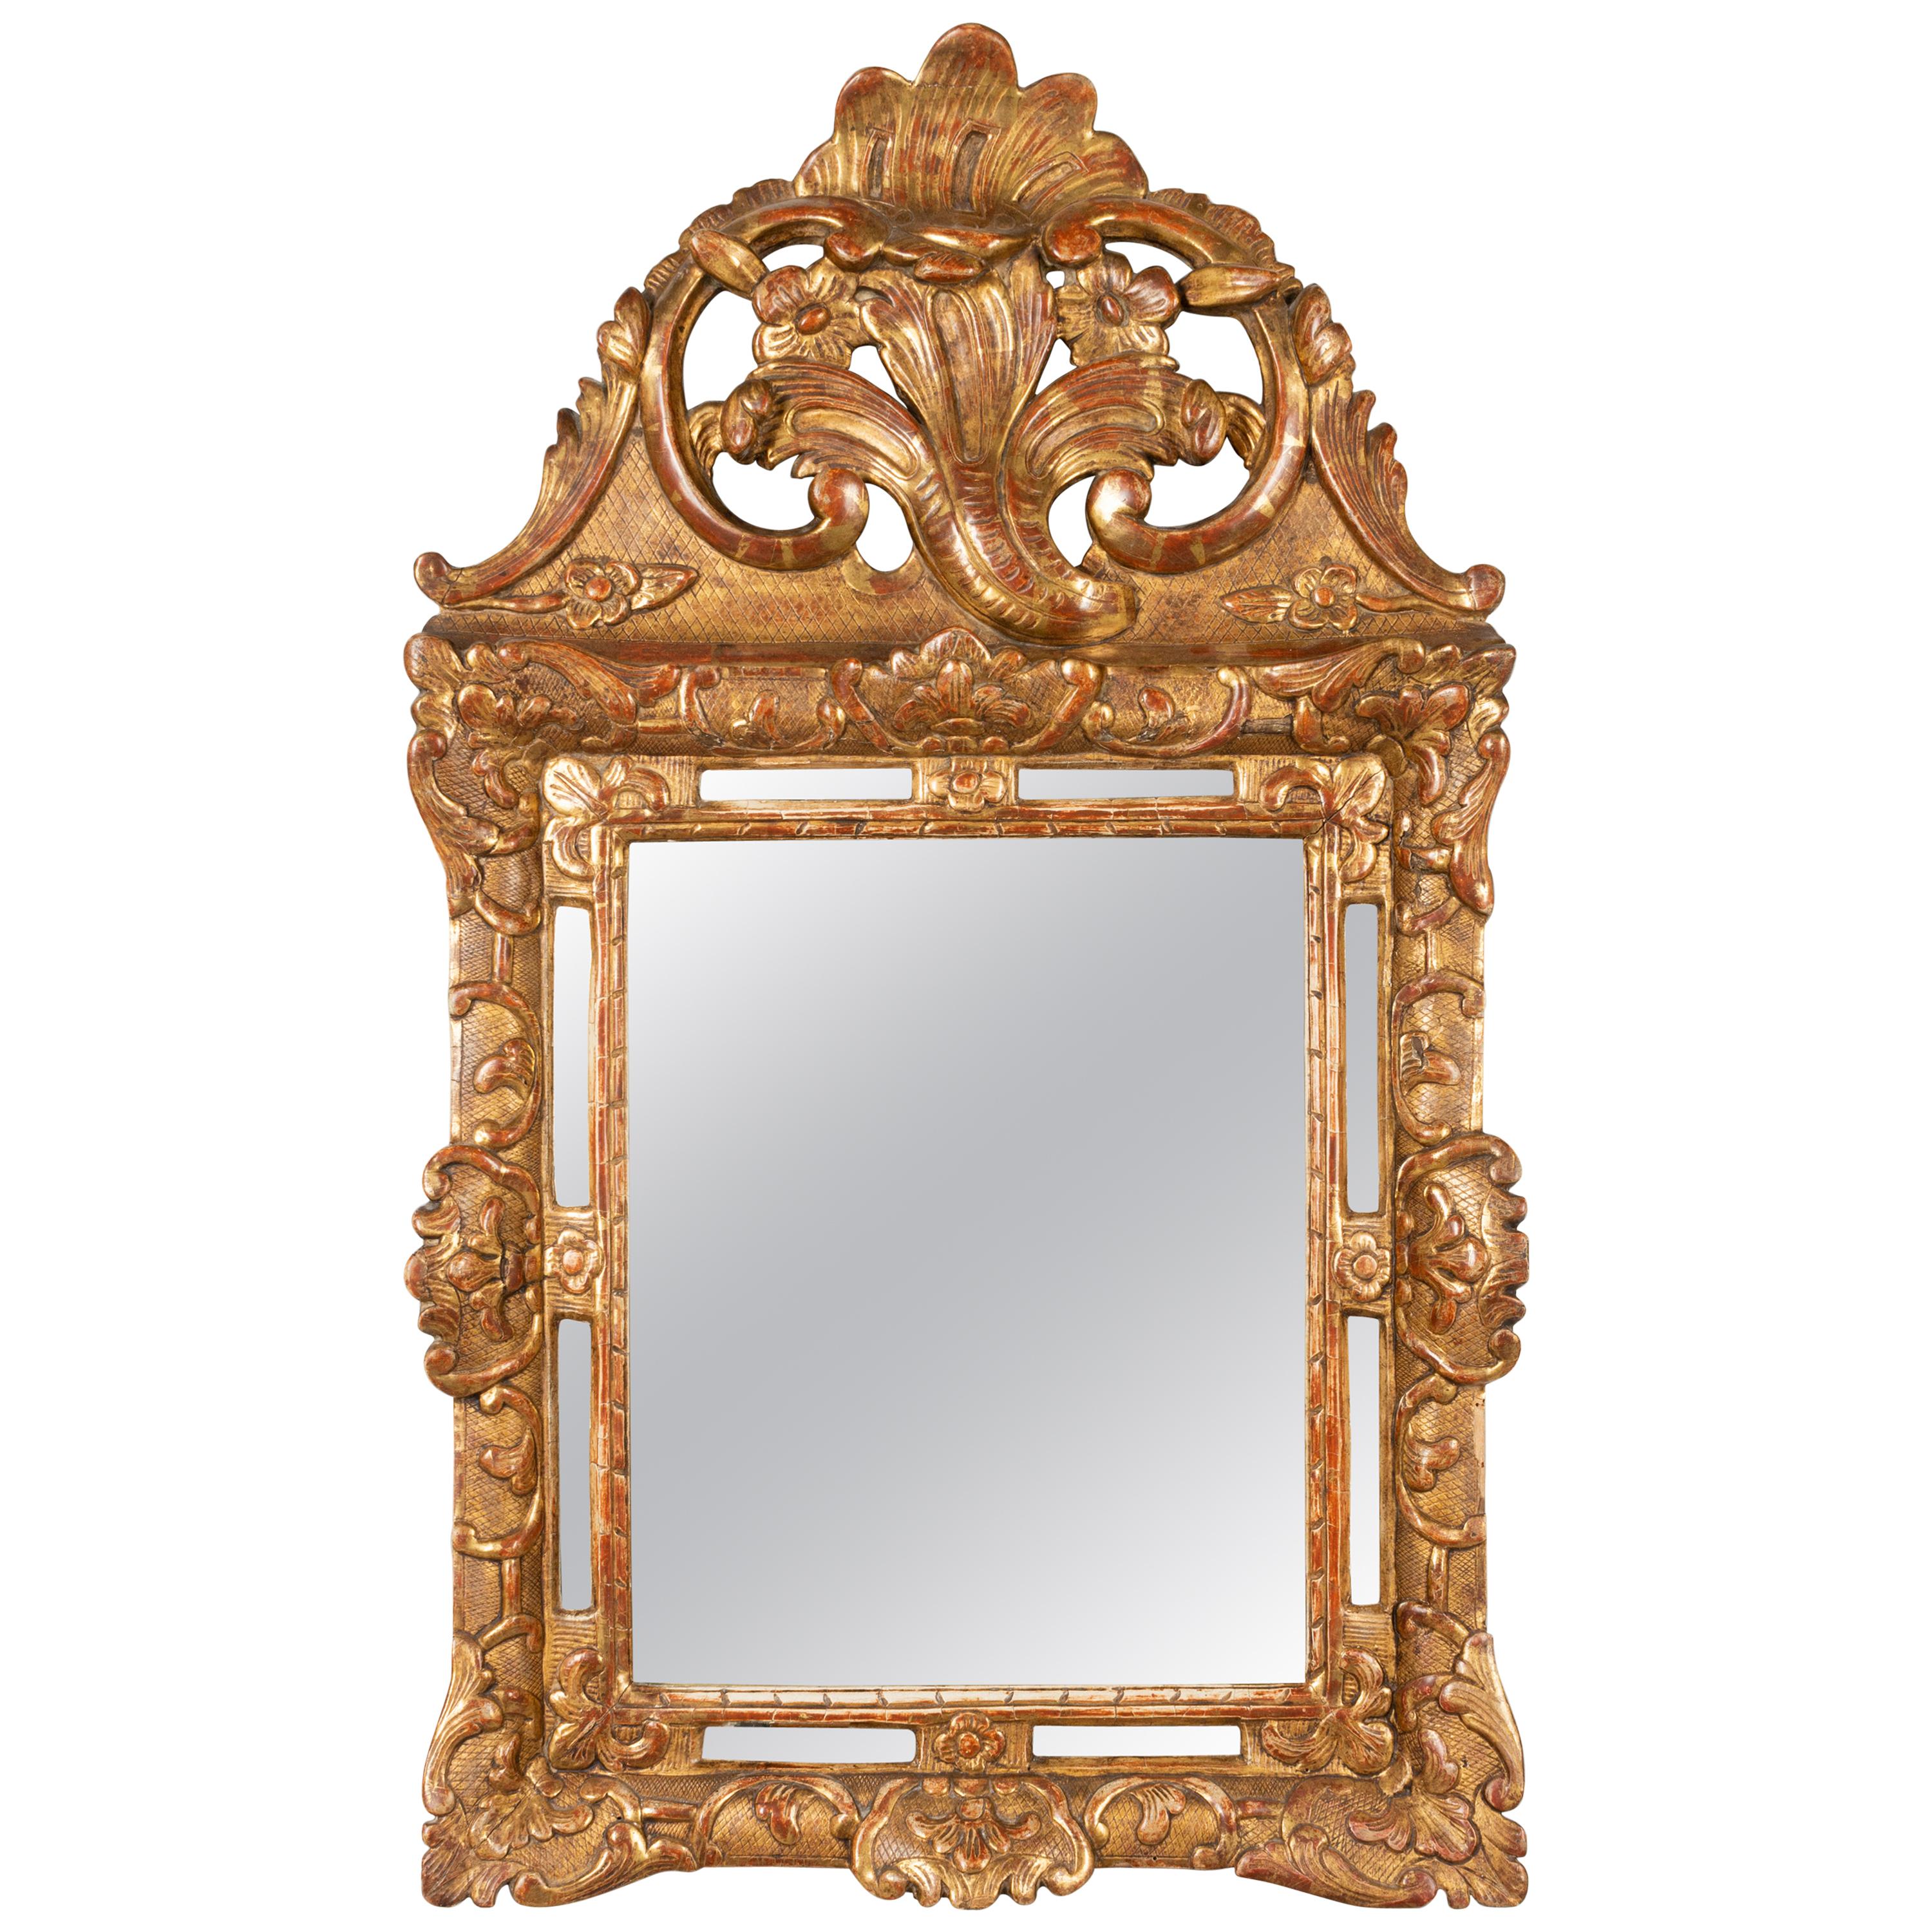 French Regence Style Gilded Parclose Mirror